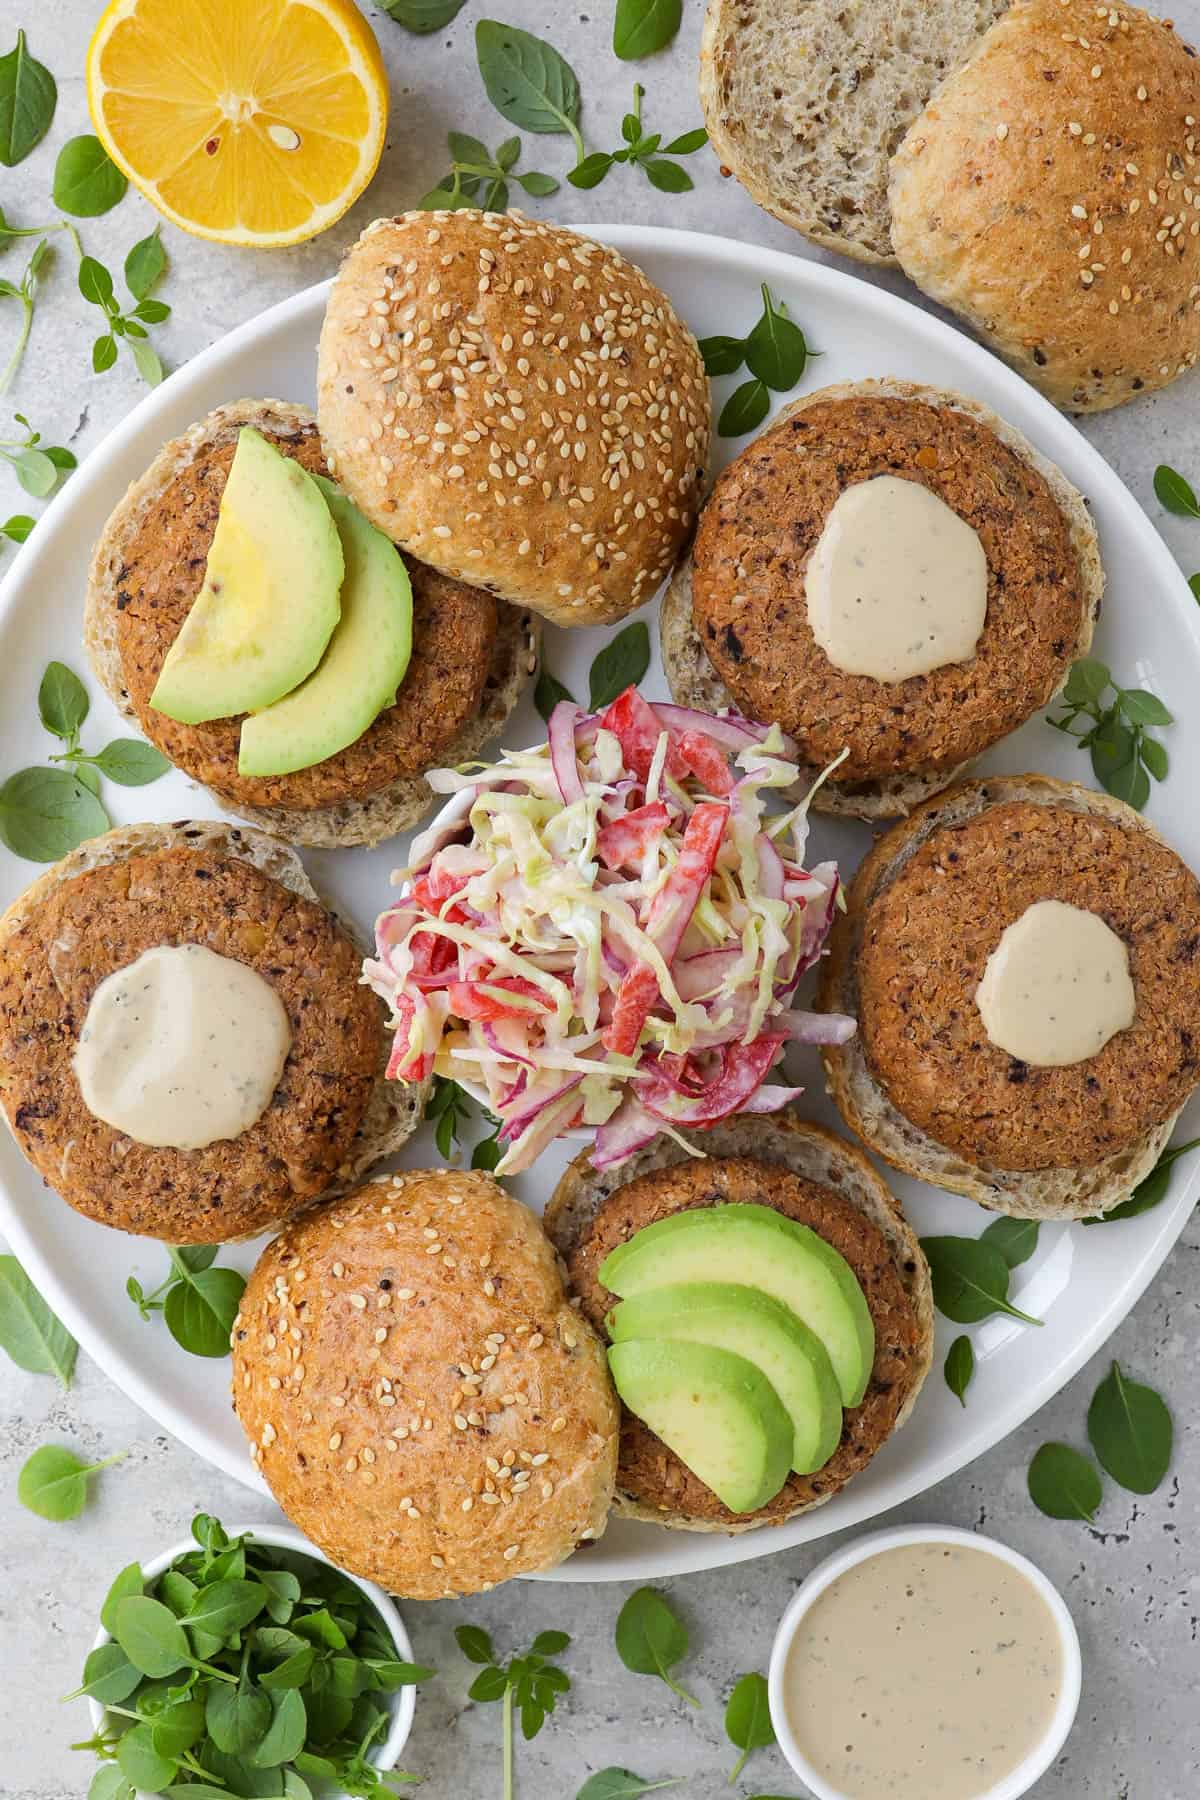 Patties on plate in burger buns with slaw and avocado.